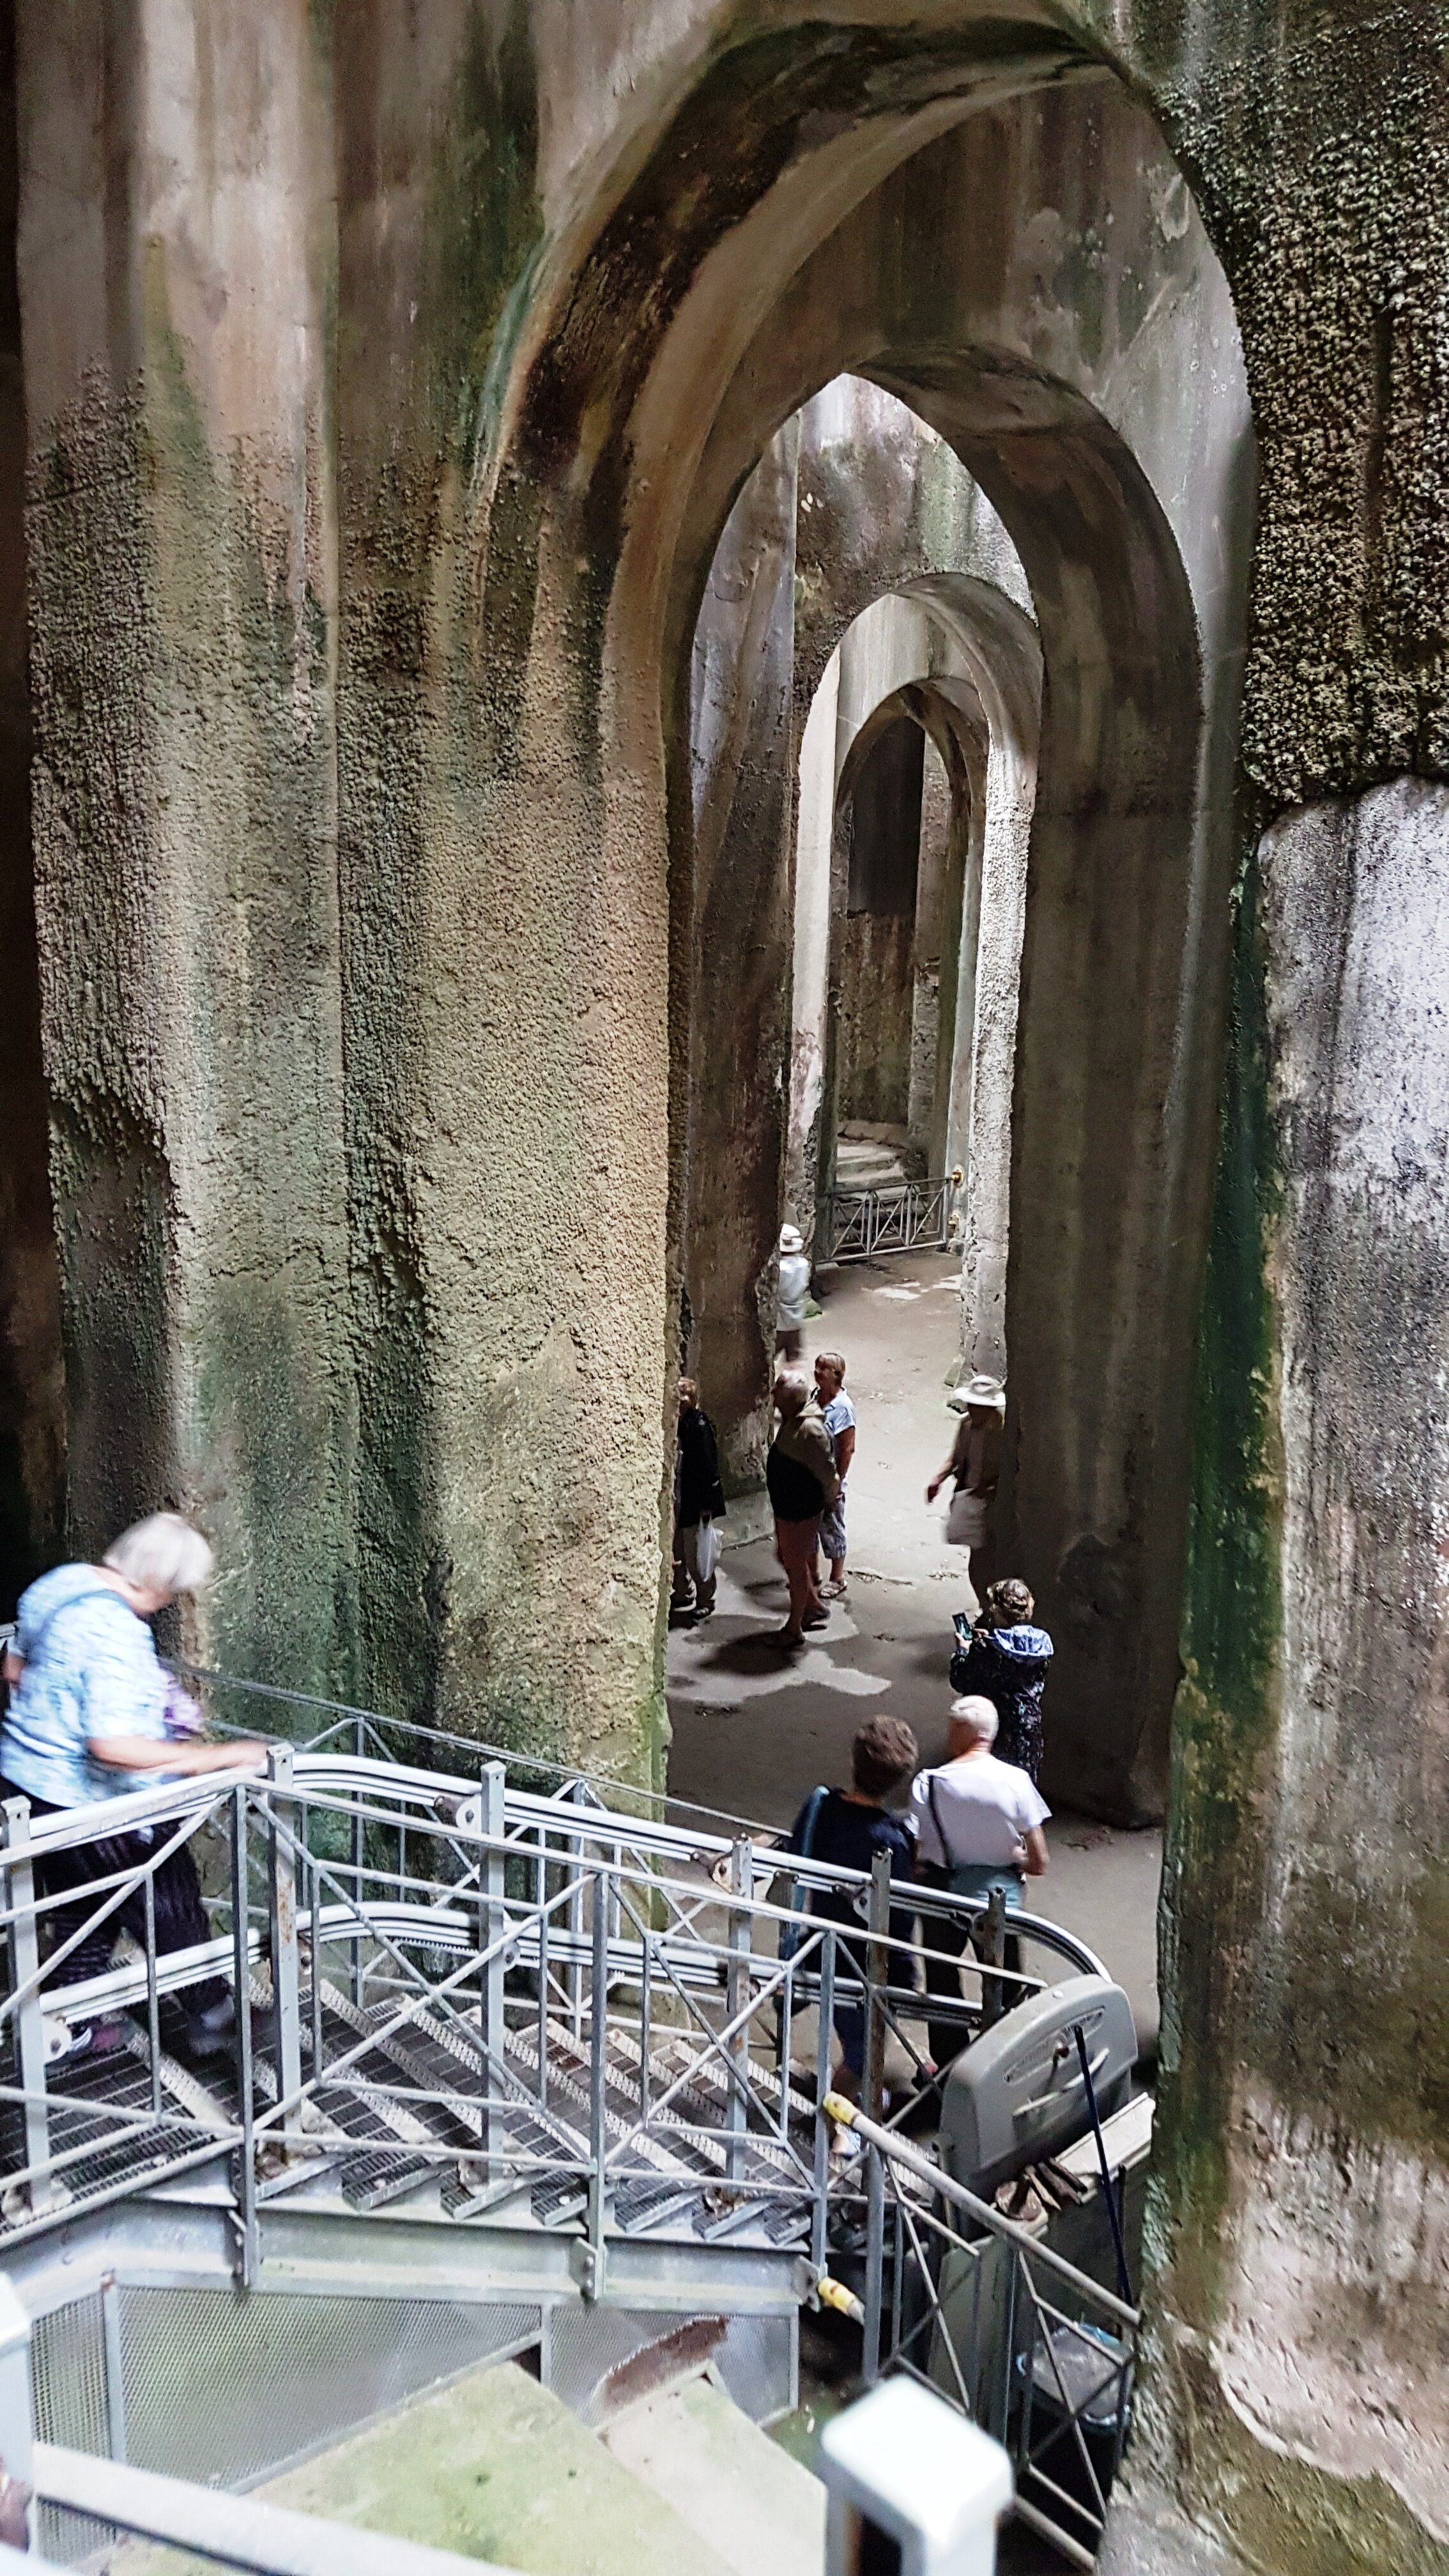 The society visits the magnificent Roman cistern at Pozzuoli, Italy. Sept 2019